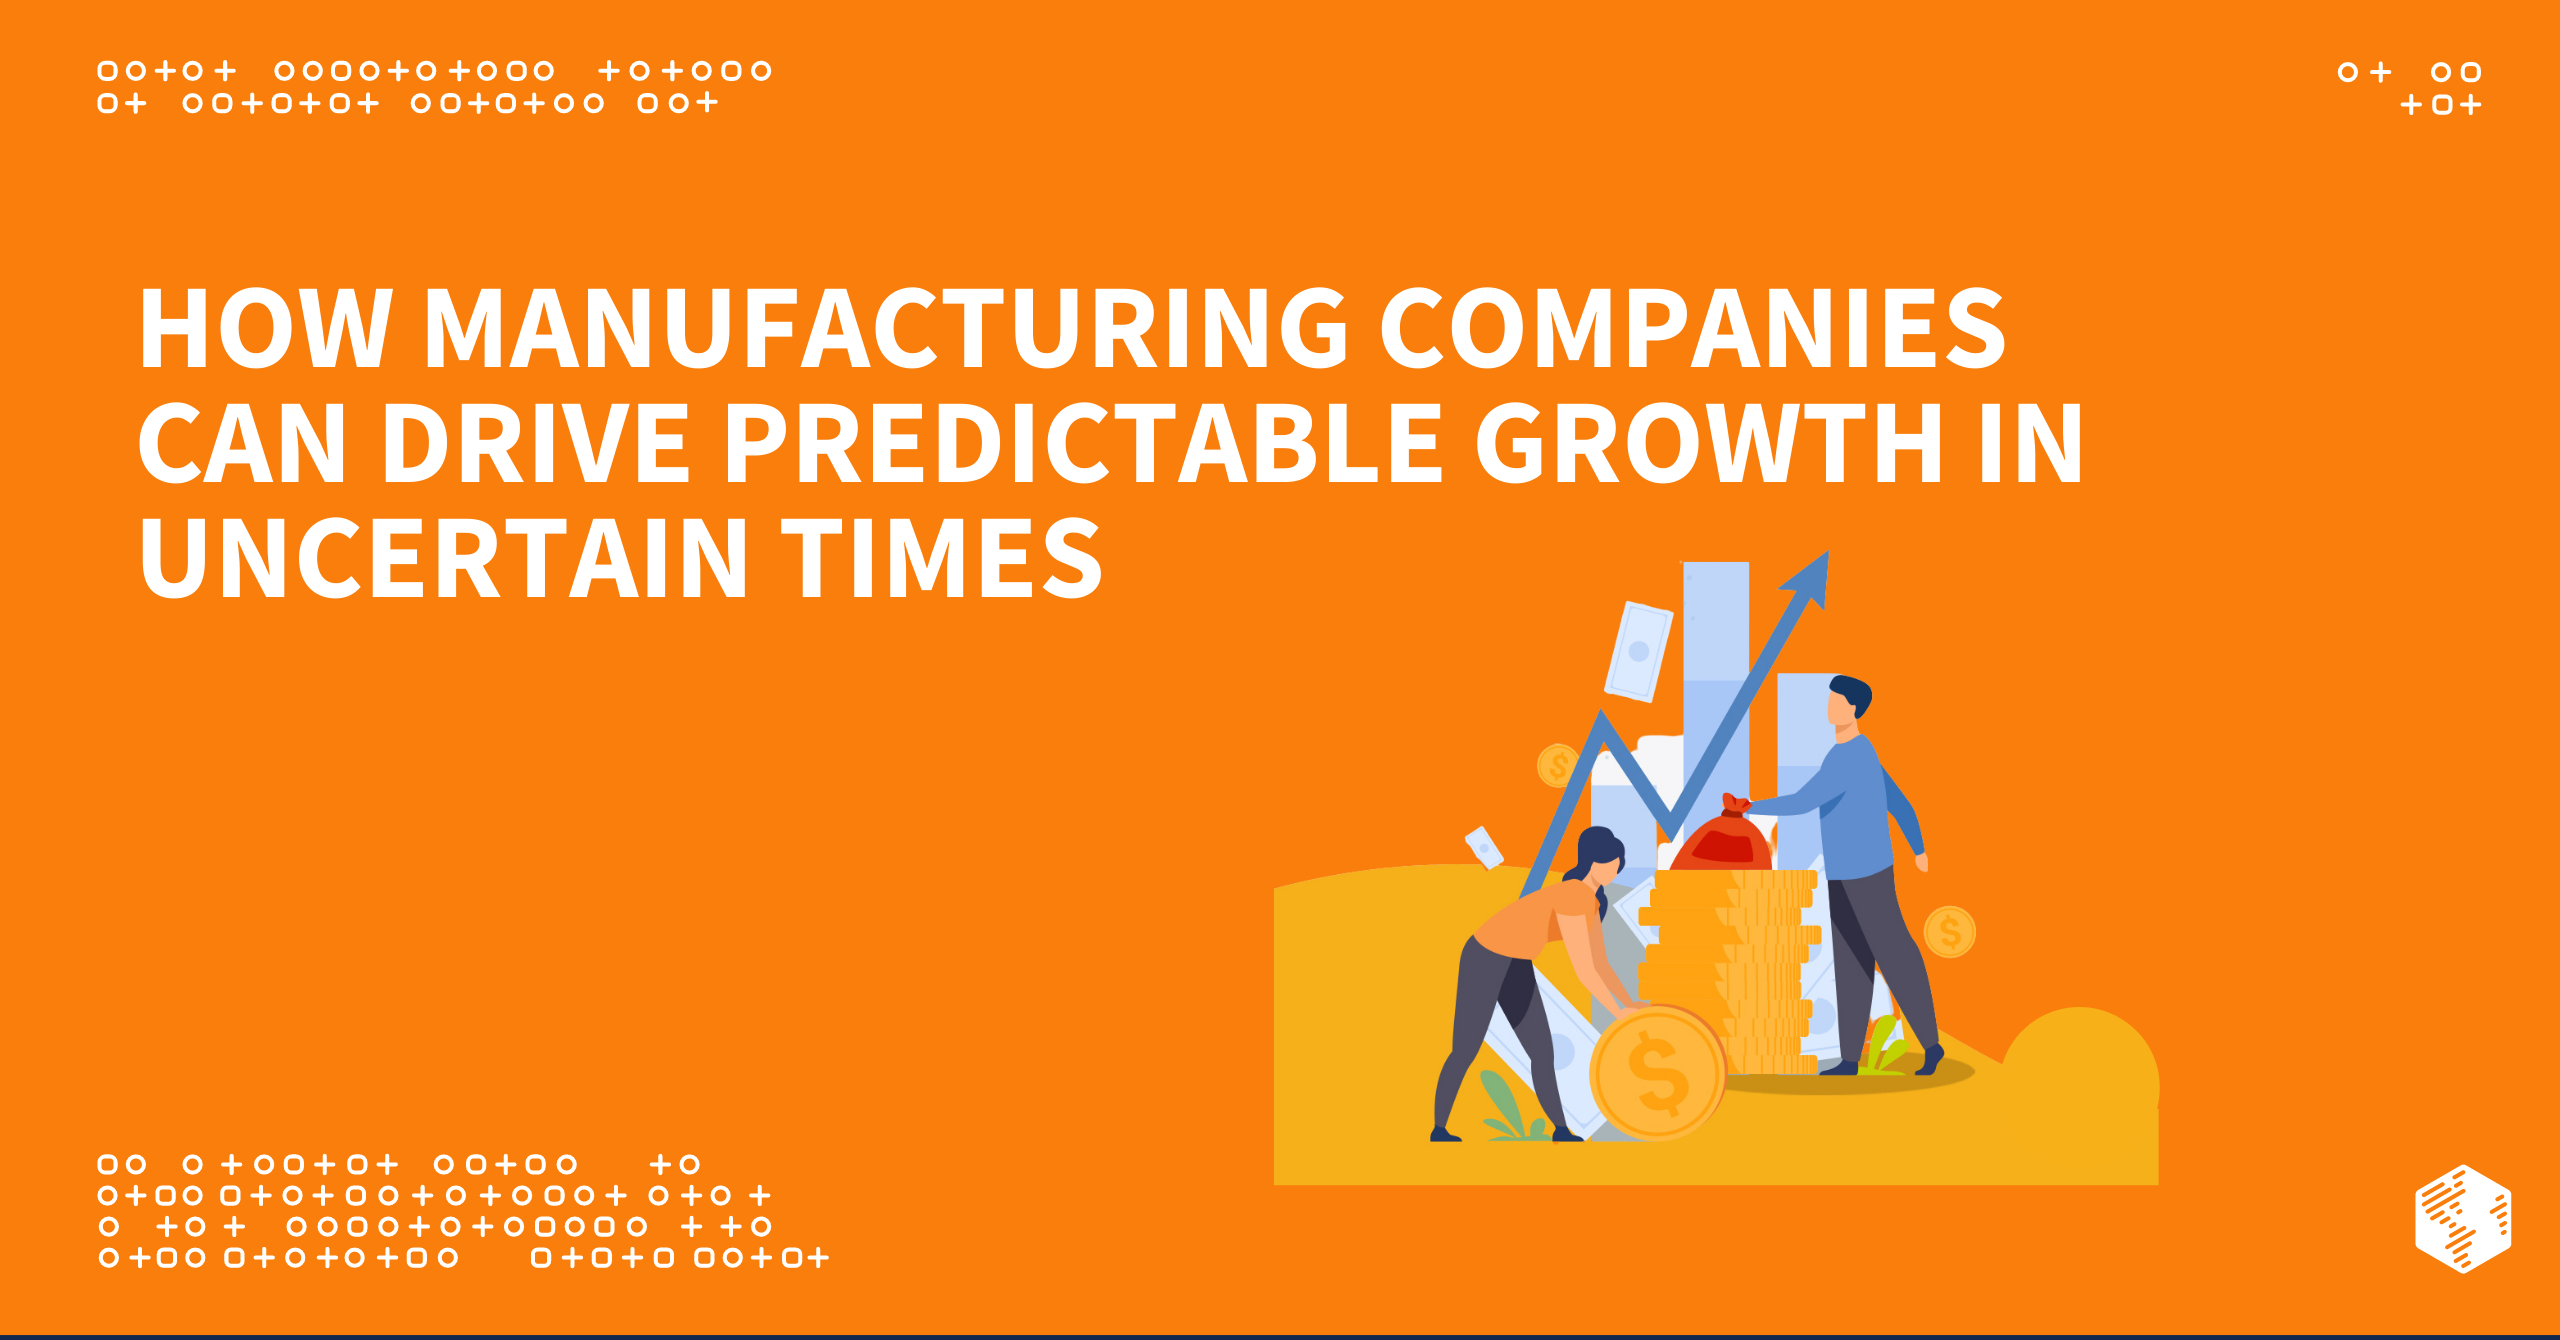 How Manufacturing Companies Can Drive Predictable Growth in Uncertain Times